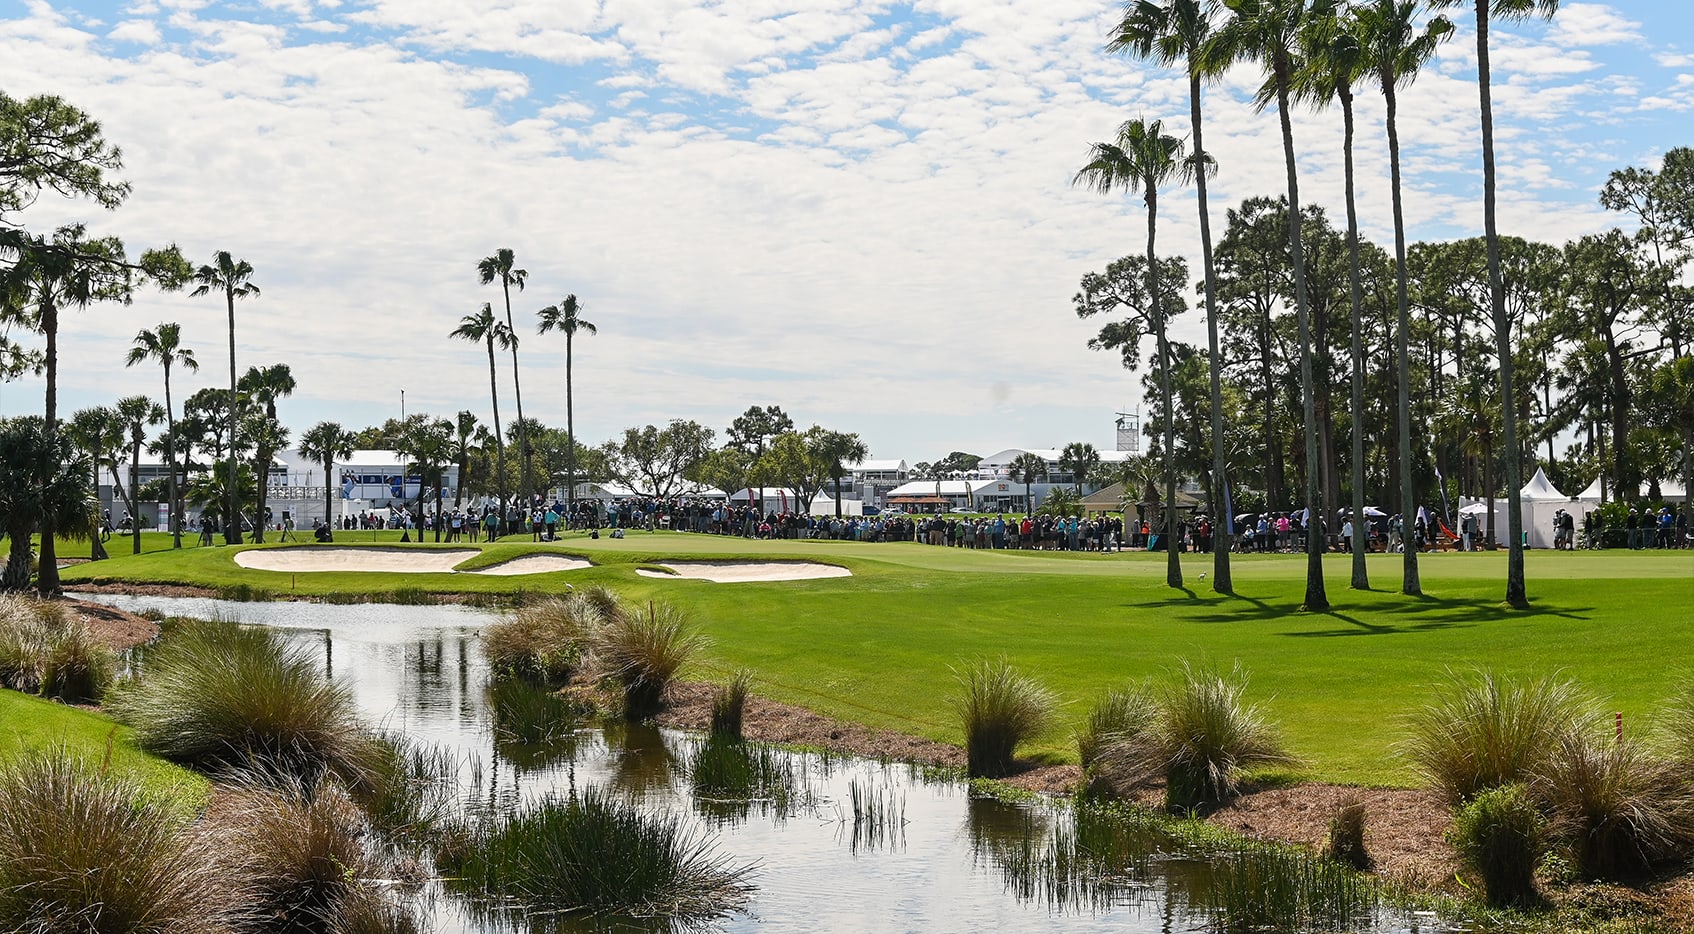 How to watch The Honda Classic, Round 2 Featured Groups, live scores, tee times, TV times